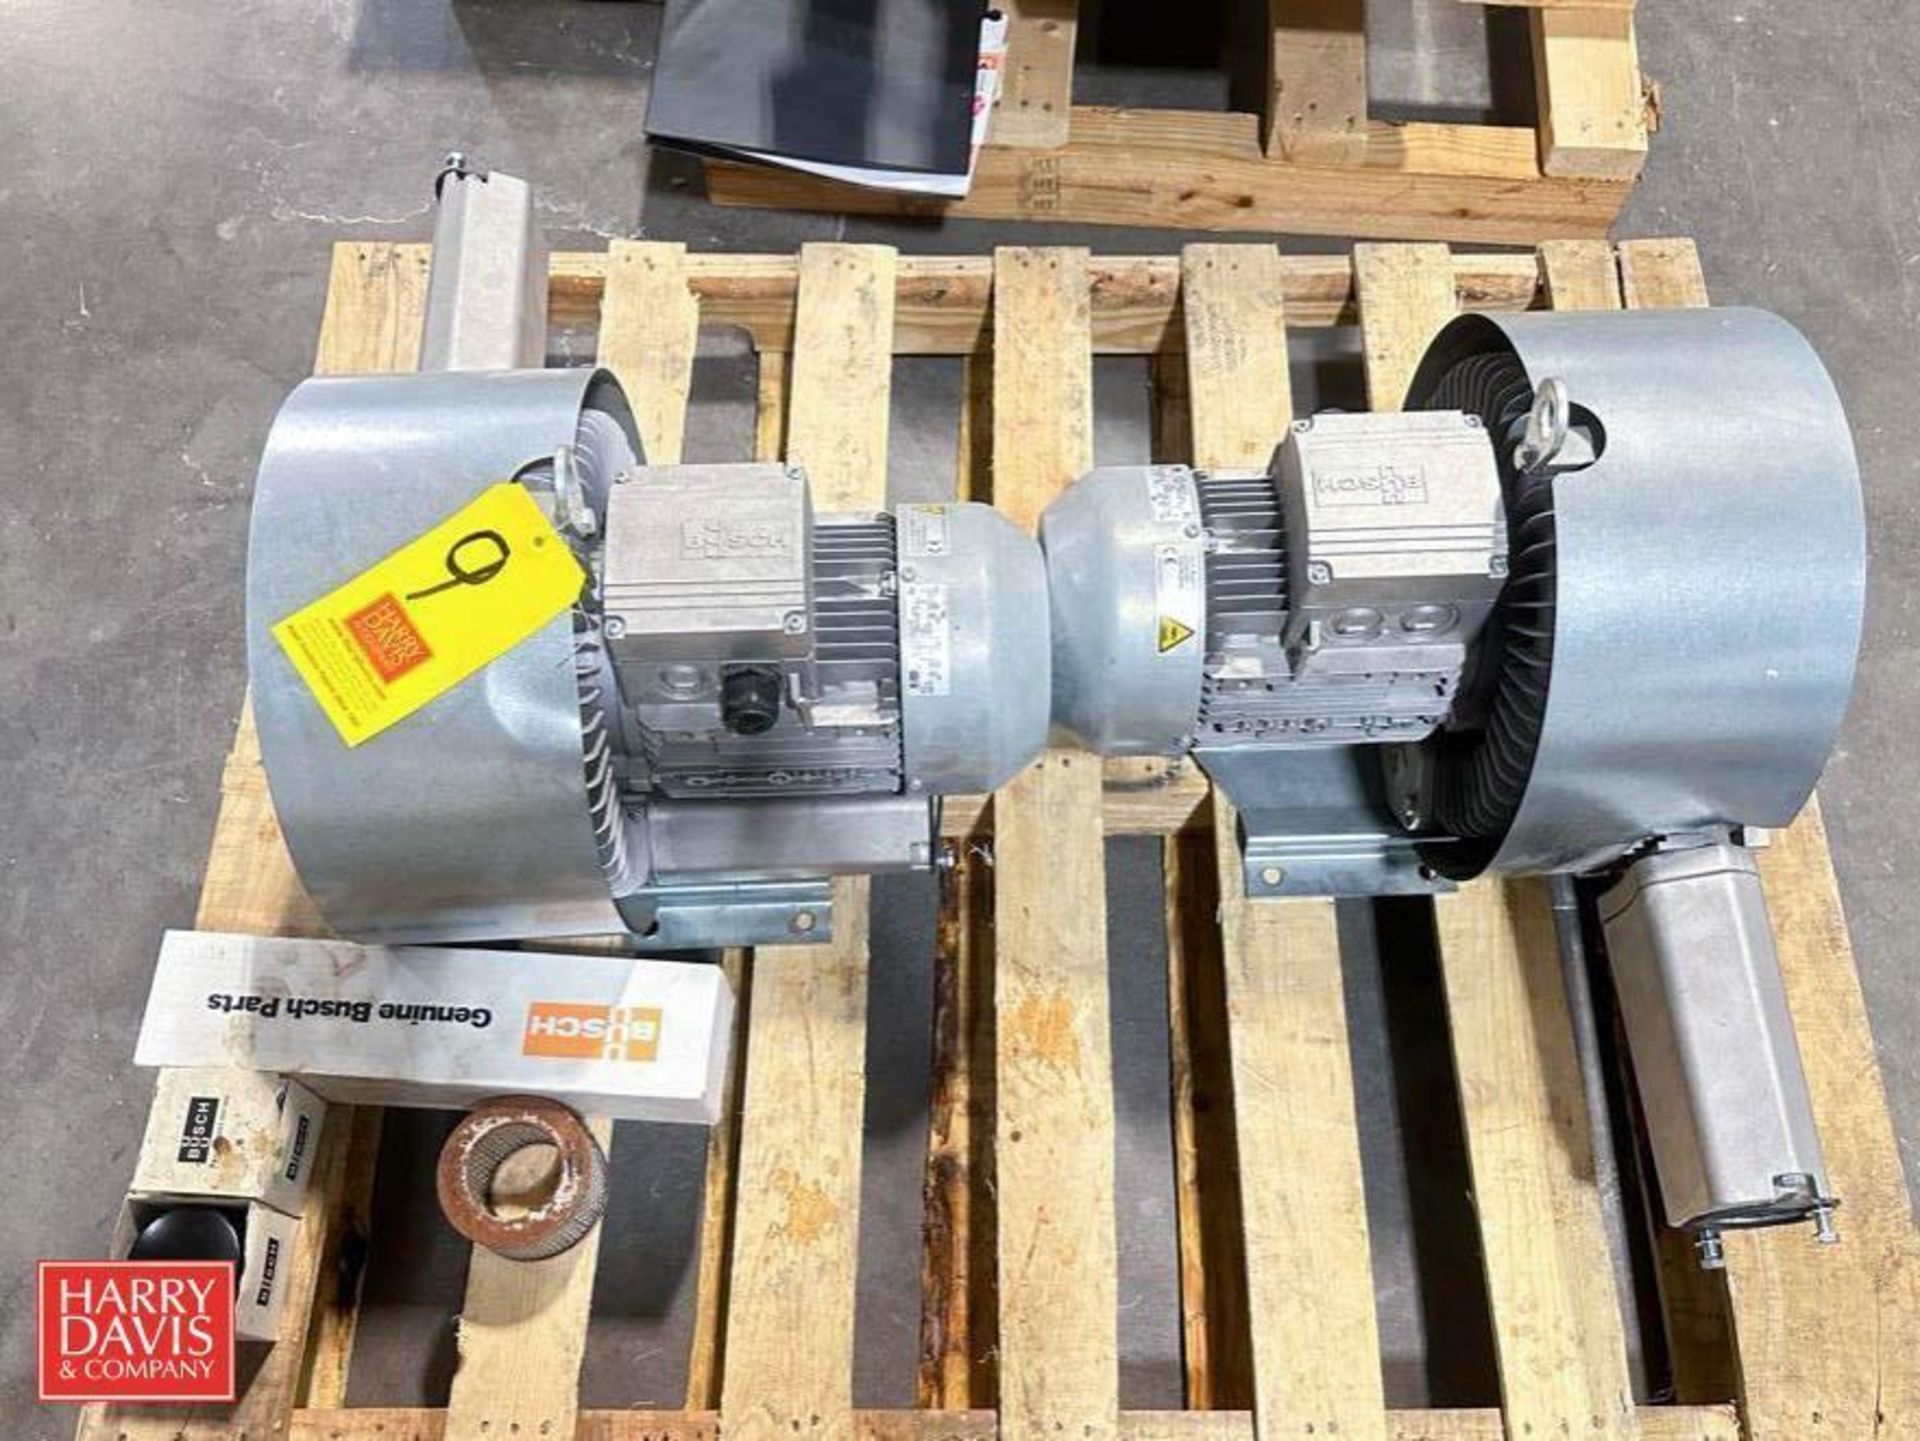 NEW Busch Vacuum Pumps with 3 HP Motors - Rigging Fee: $200